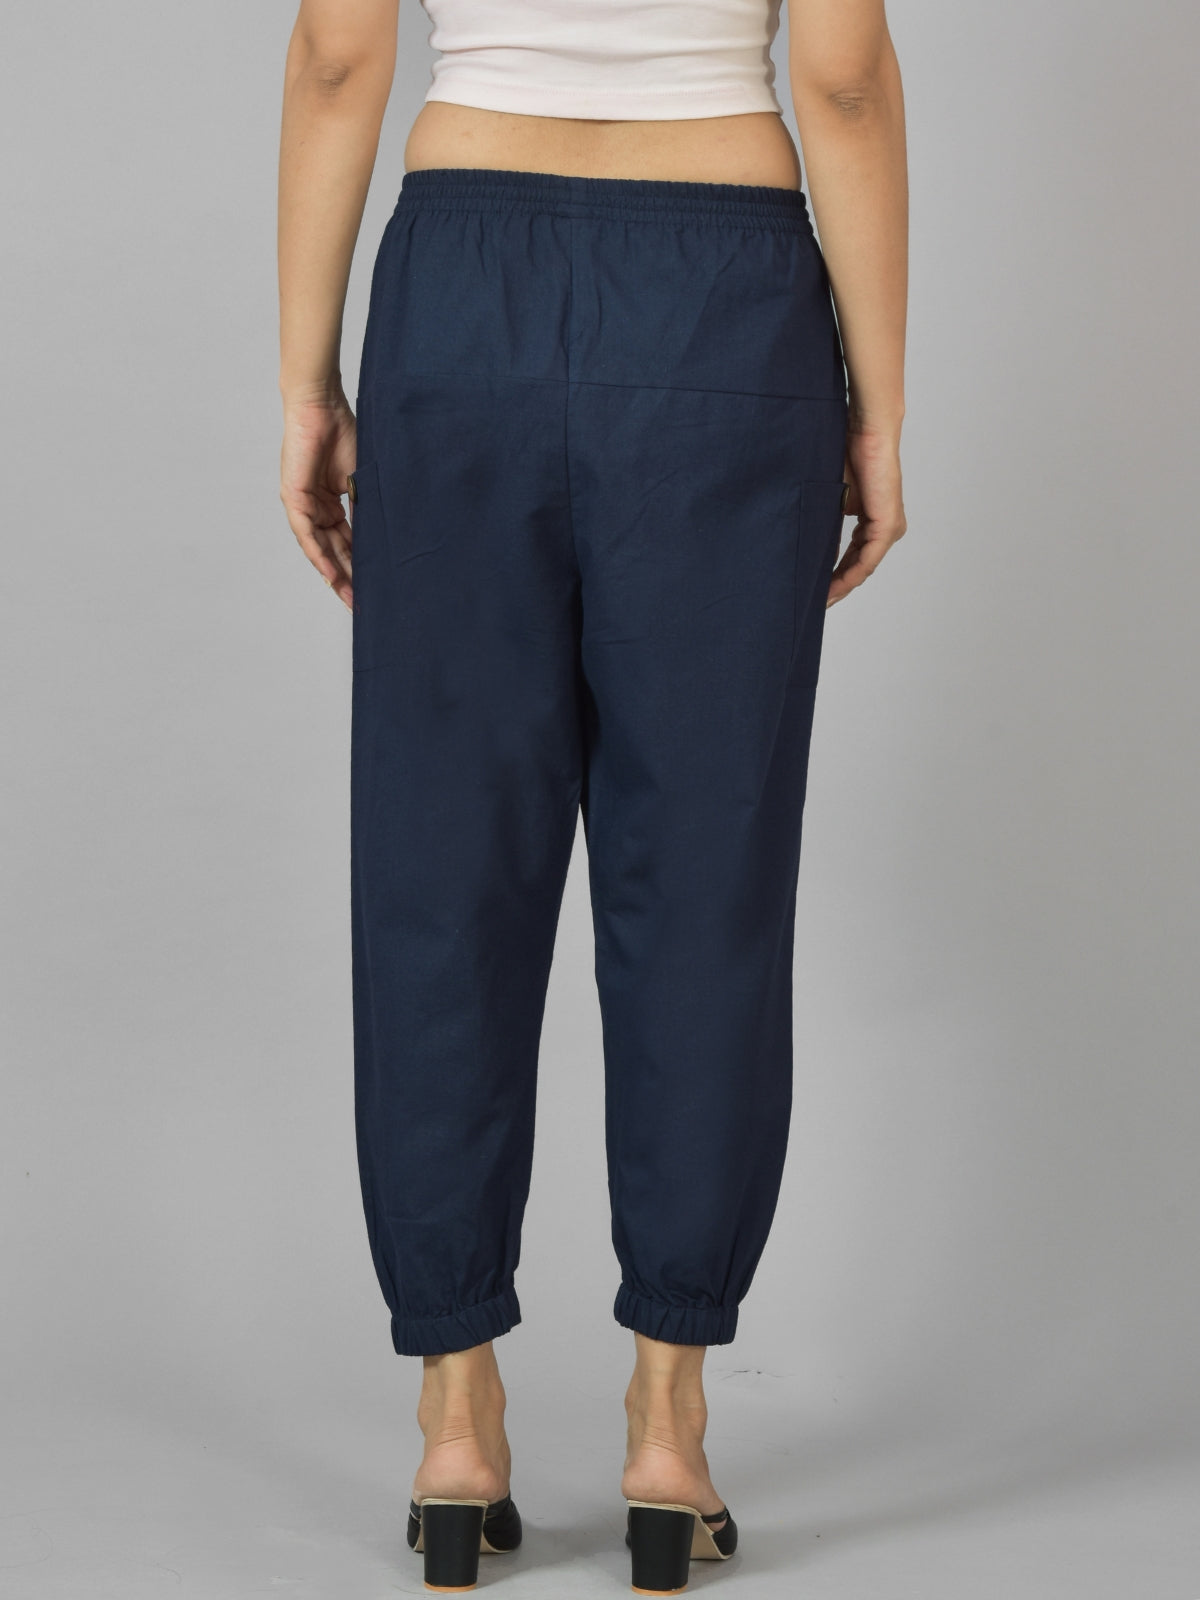 Combo Pack Of Womens Dark Blue And Grey Four Pocket Cotton Cargo Pants